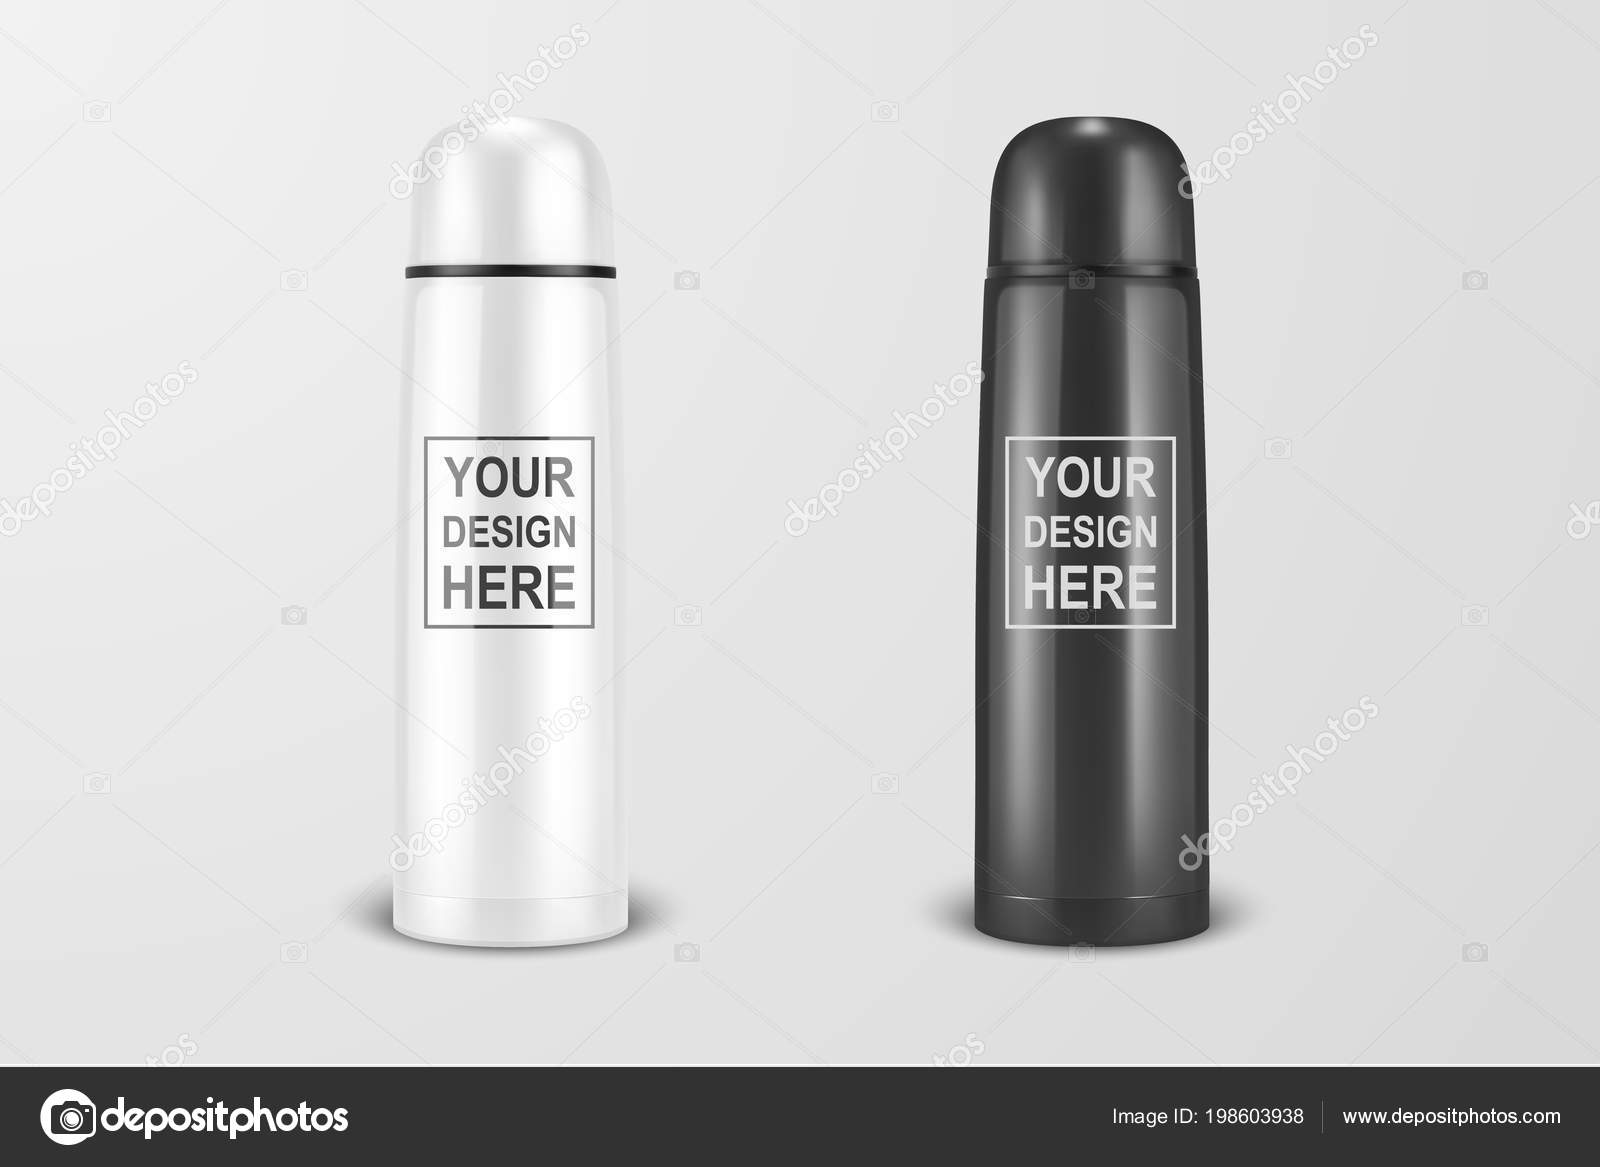 Download Vector Realistic 3d White And Black Empty Glossy Metal Vacuum Thermo Tumbler Flask Icon Set Closeup On White Background Design Template Of Packaging Mockup For Graphics Front View Vector Image By C